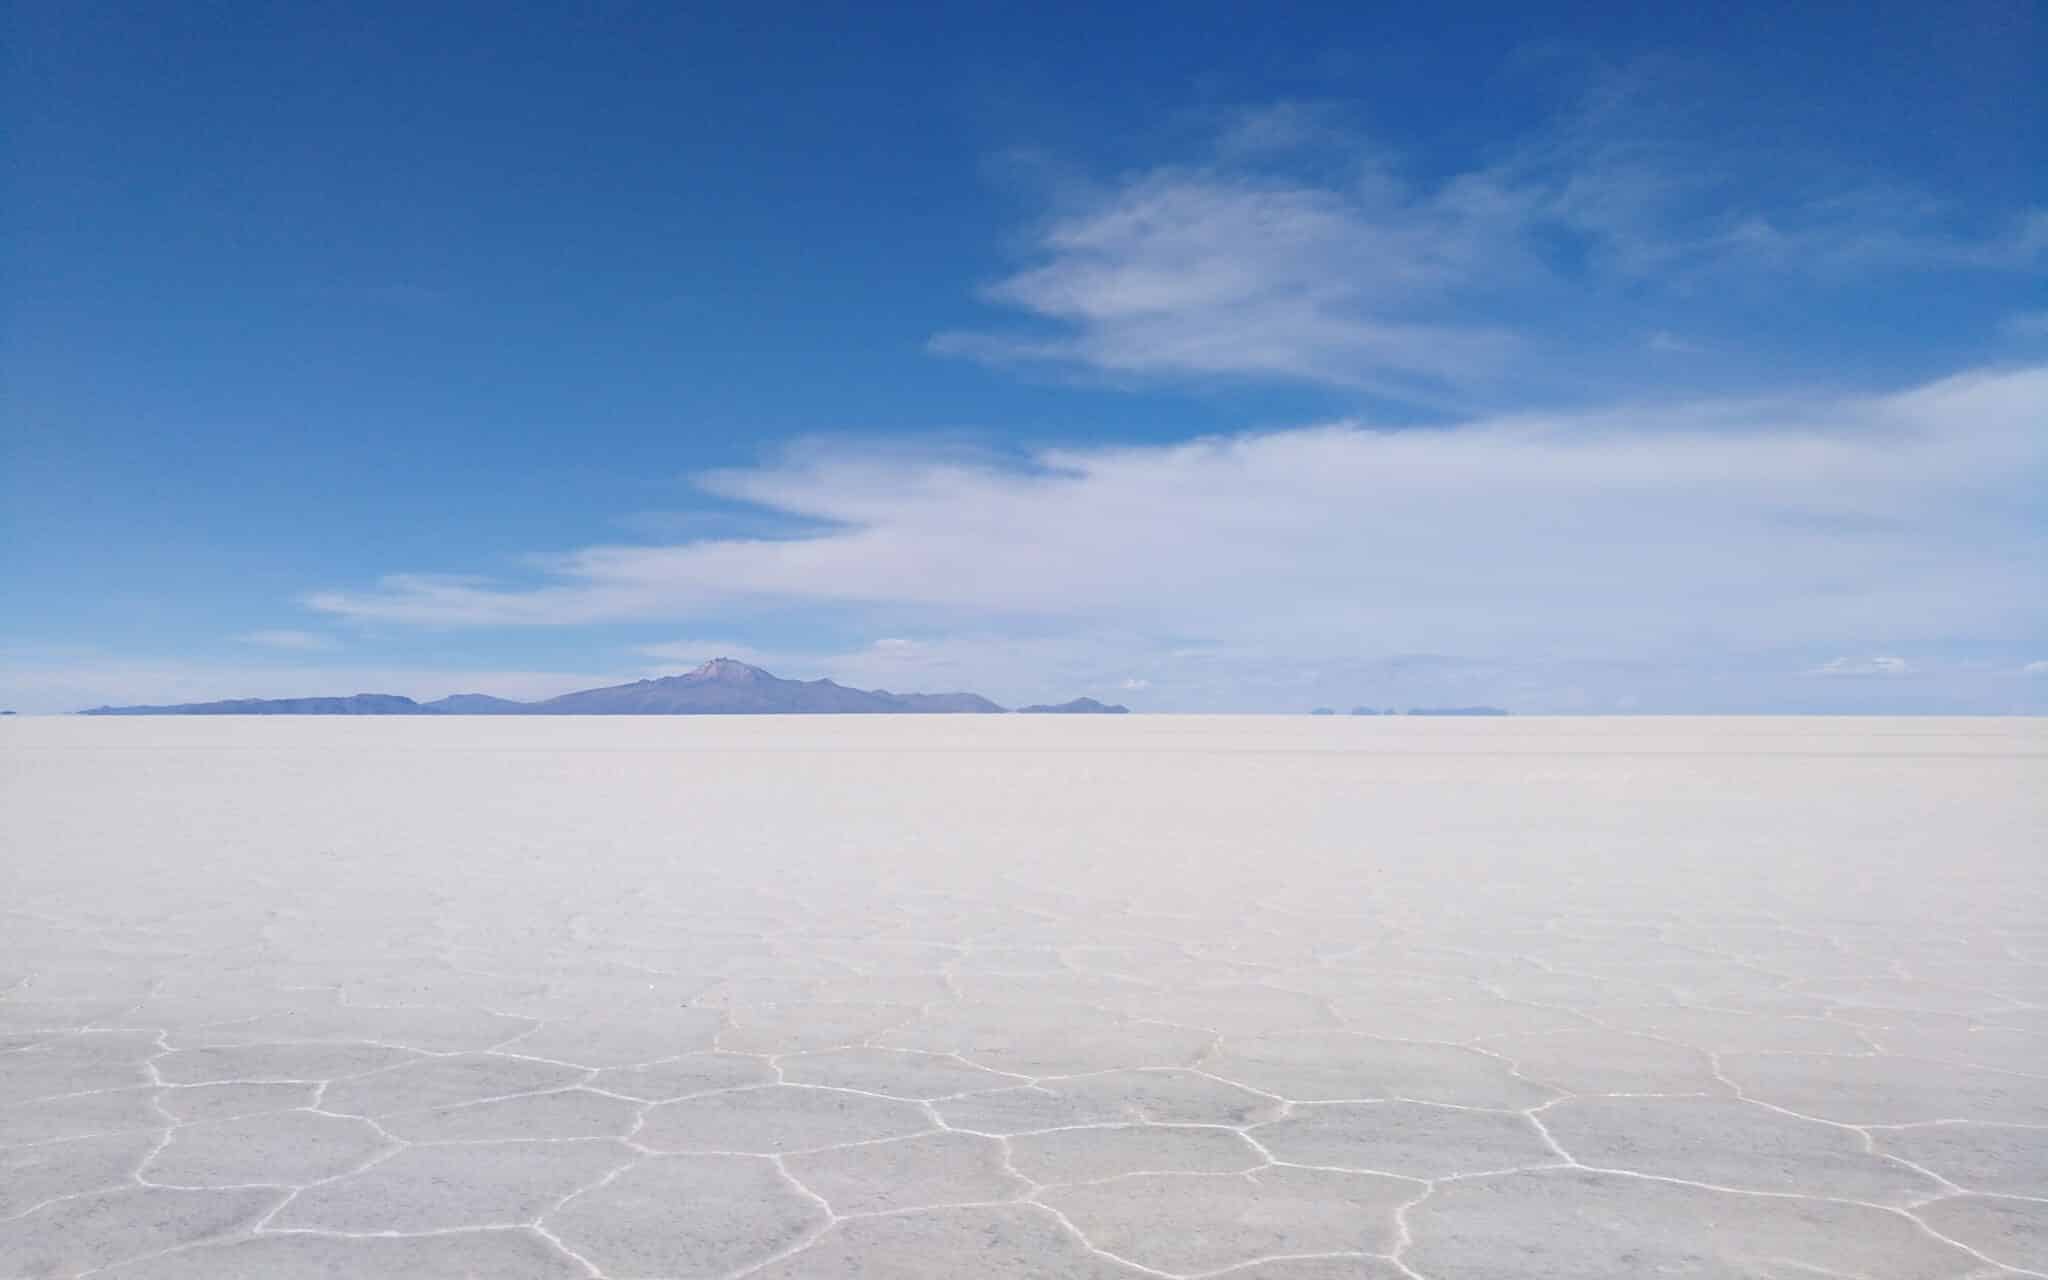 The Salar De Uyuni, In the foreground Well Recognizable The Salt Crust As Ground, On the horizon Mountains.